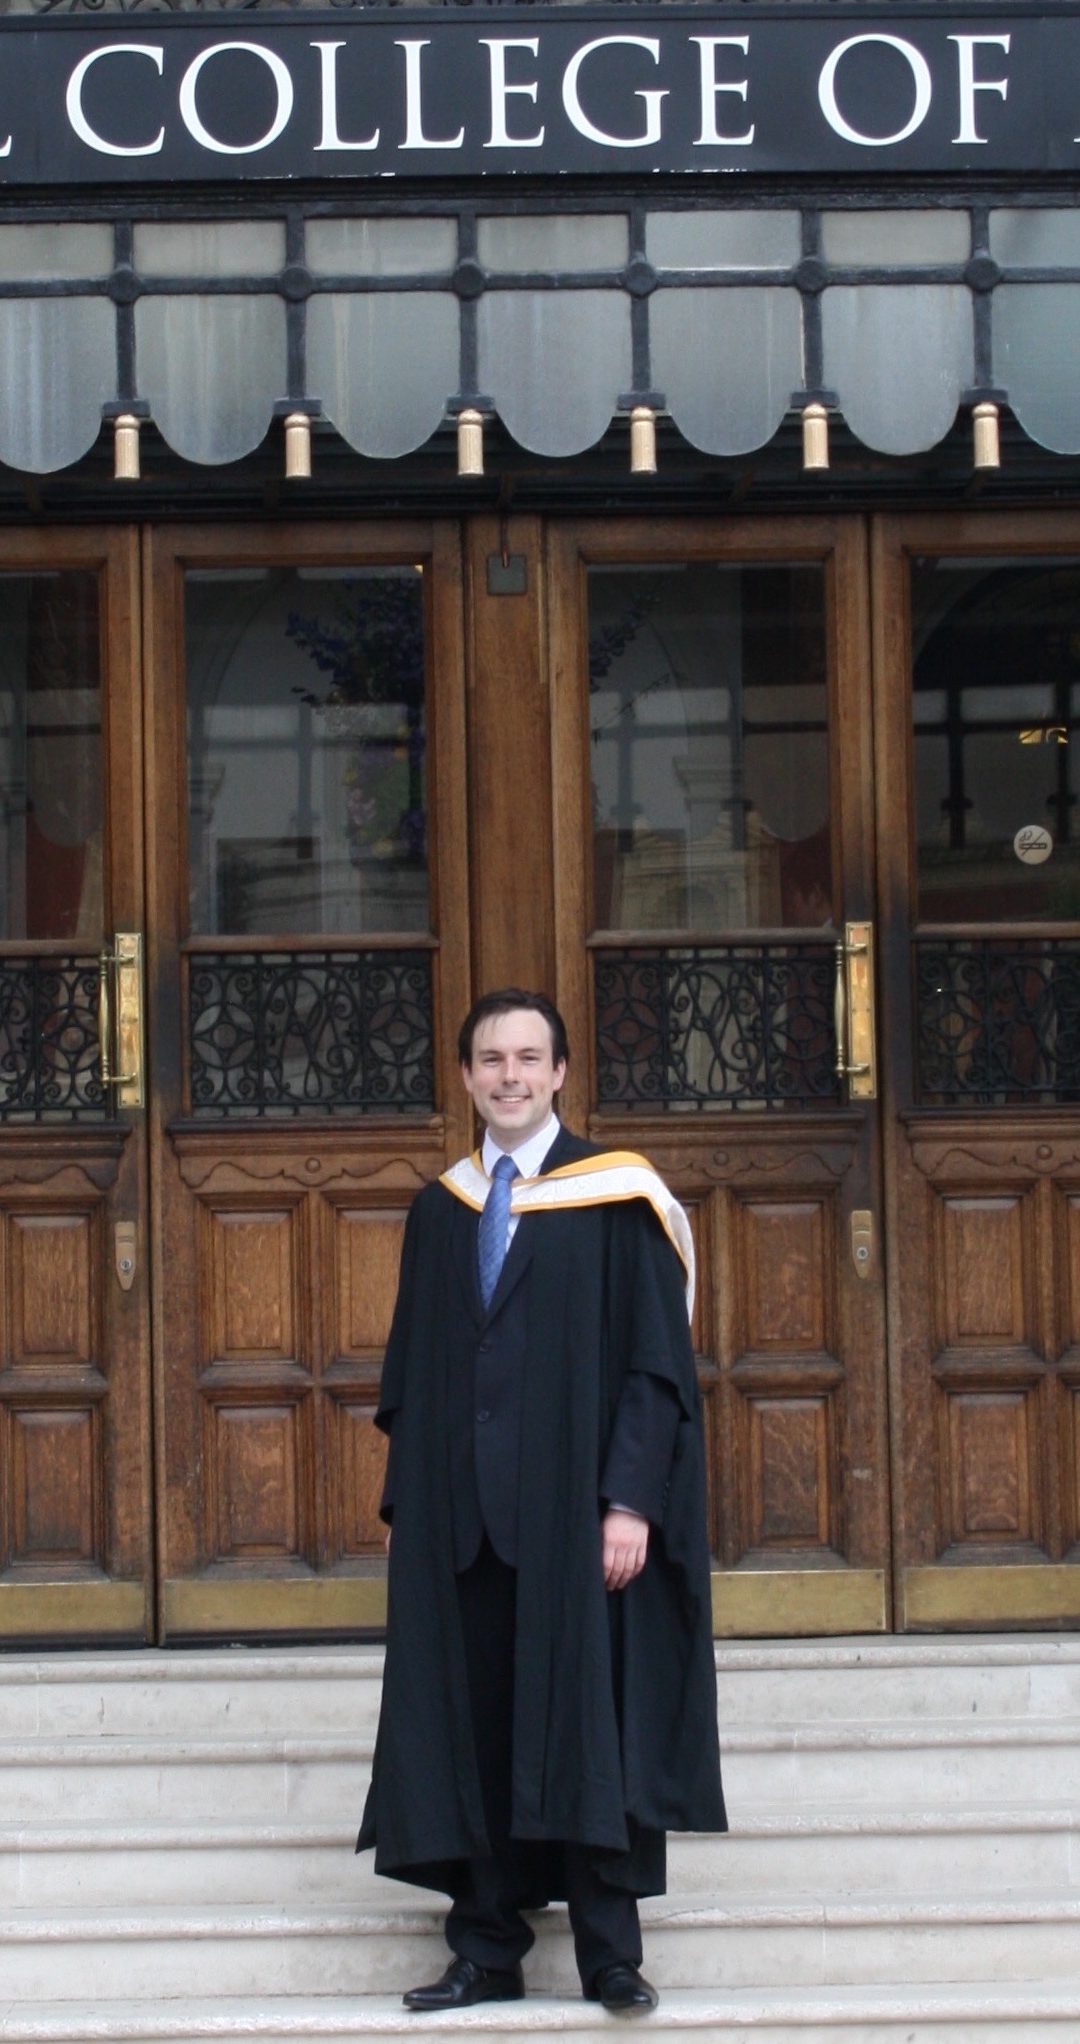 Graduation, and New Recordings Online!